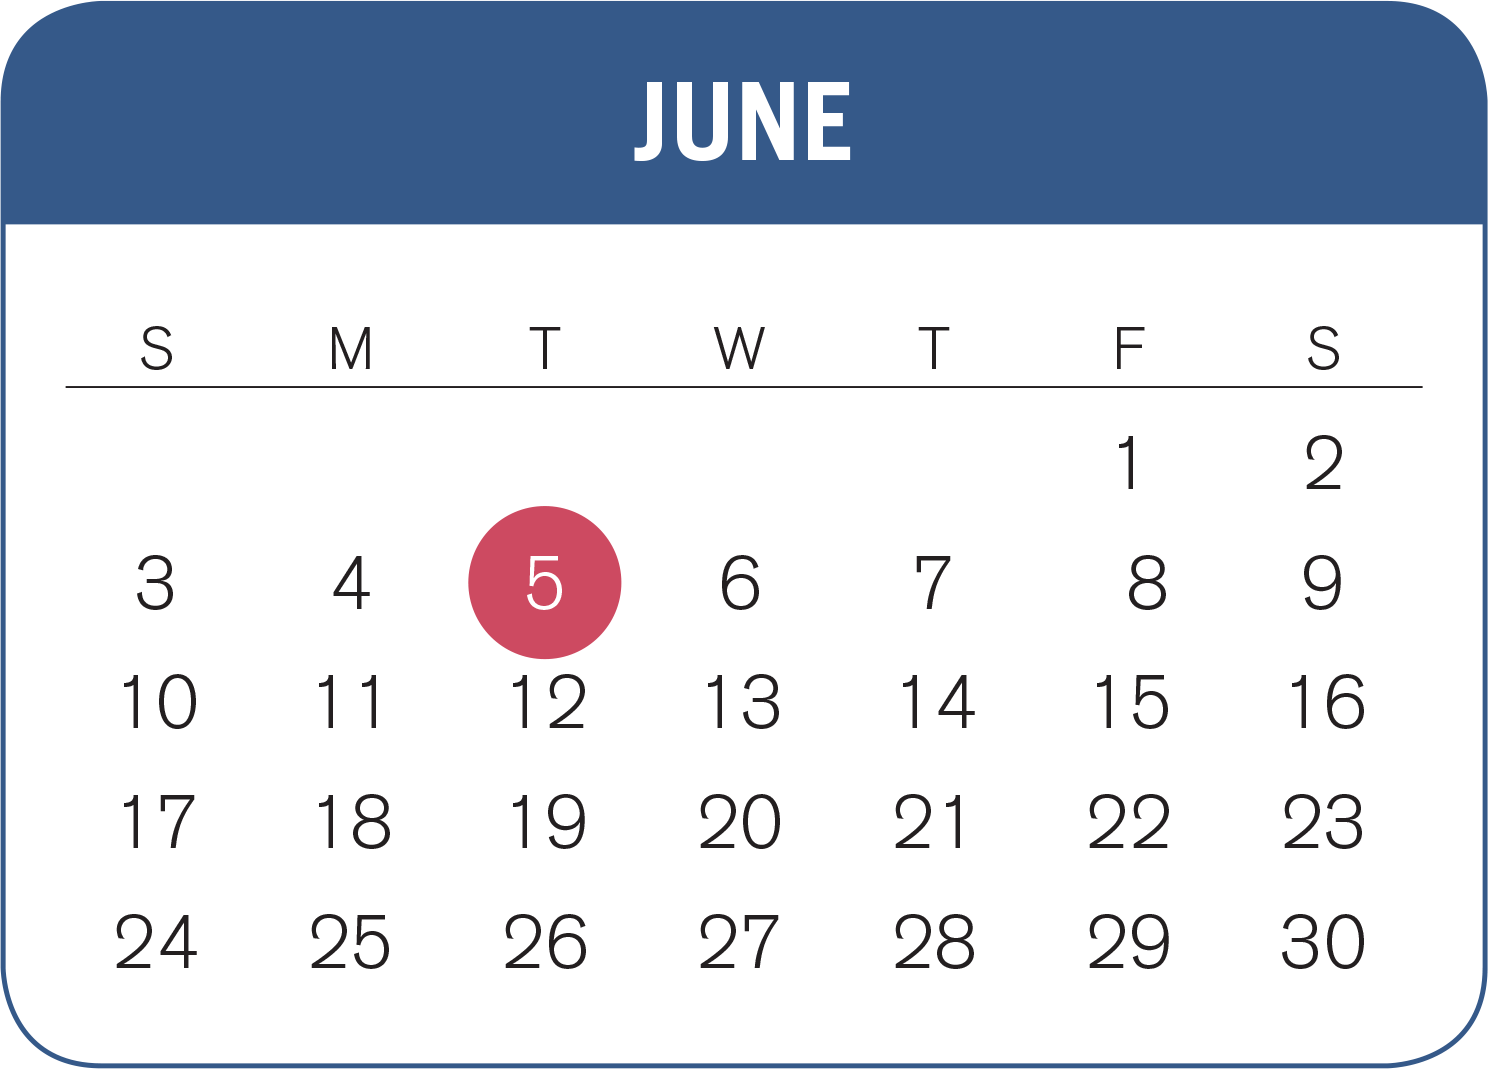 Calendar of the month of June